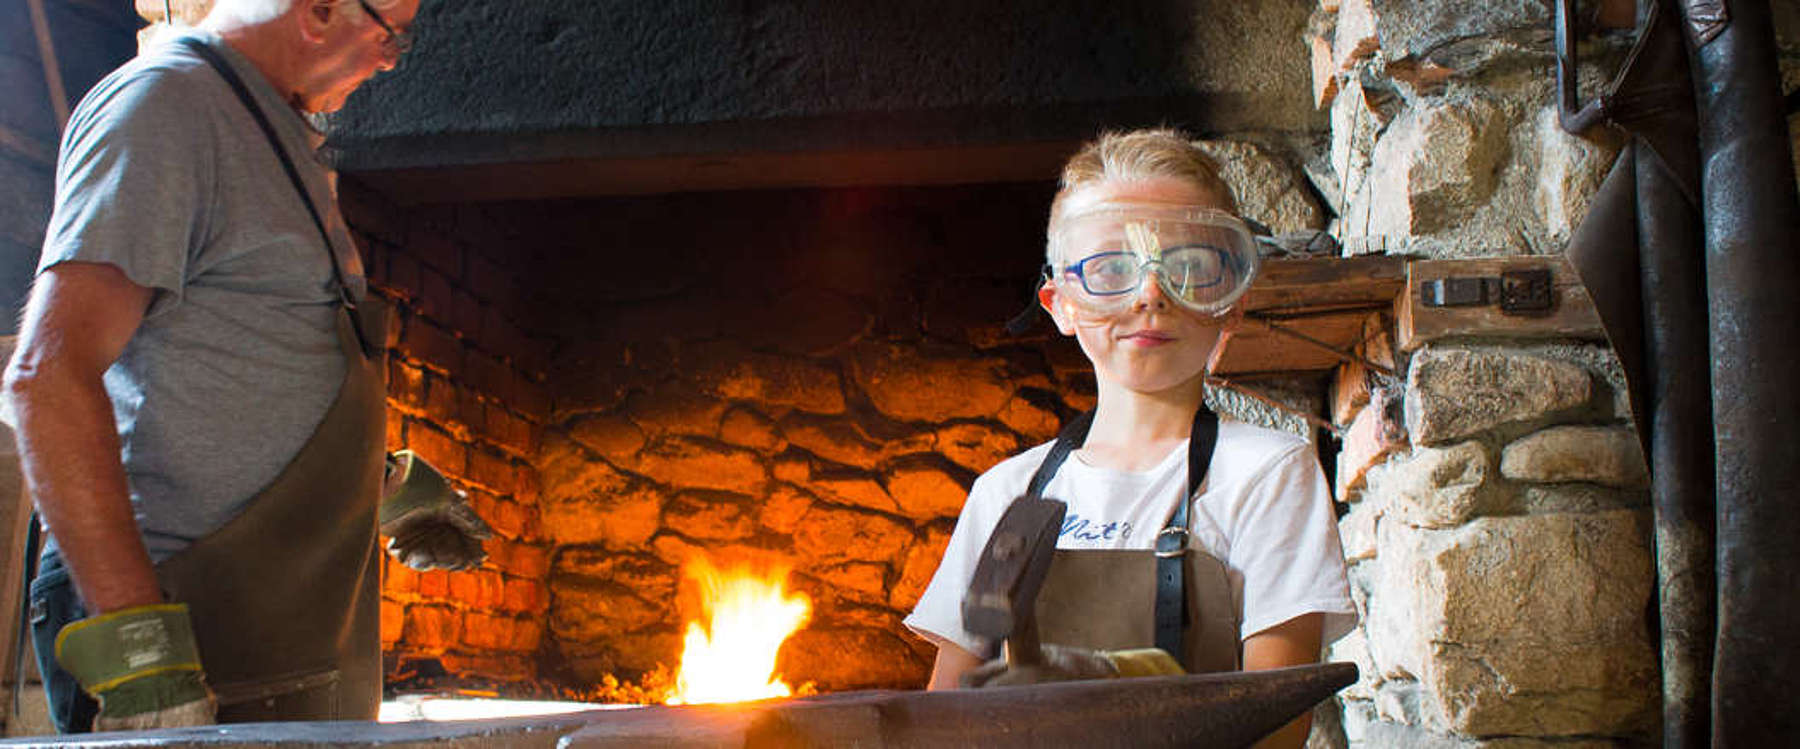 Blacksmithing for children at the Open-Air Museum Finsterau